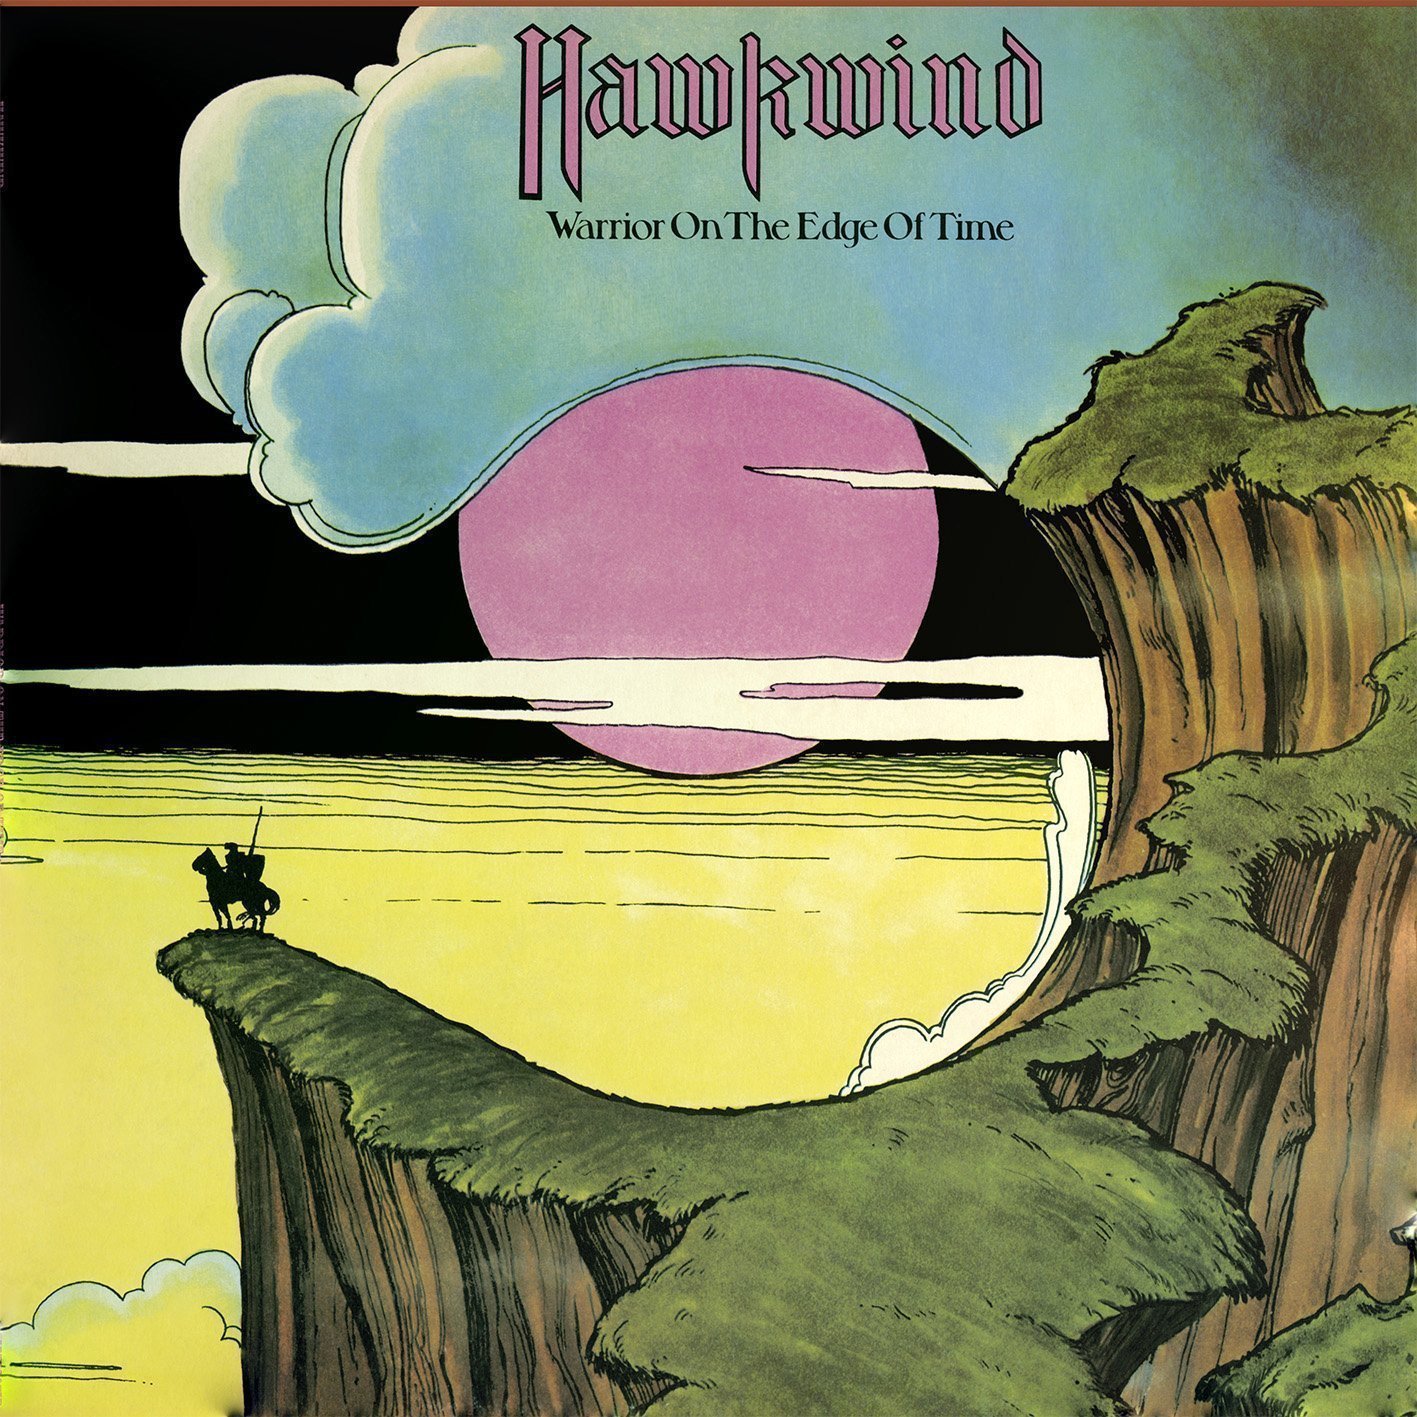 Vinyl Record Hawkwind - Warrior On The Edge Of Time (LP)